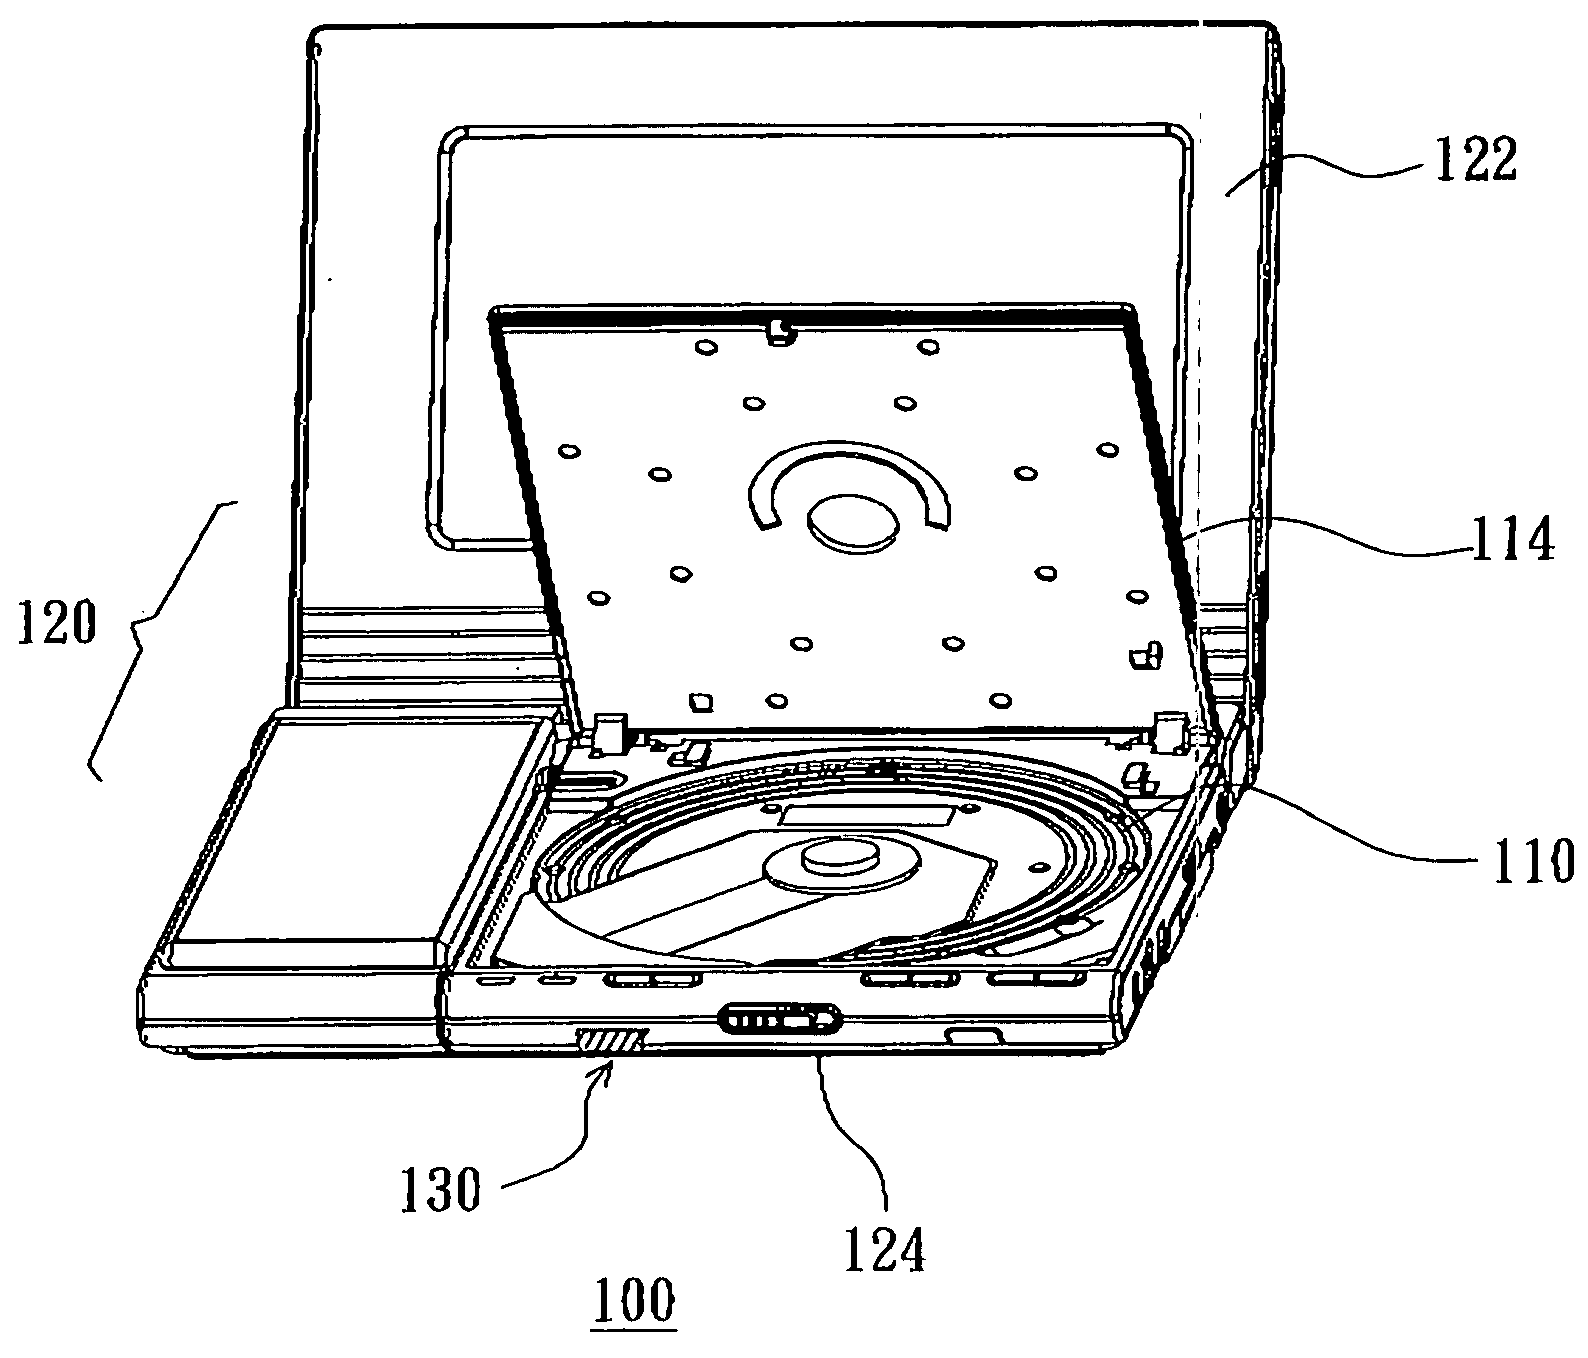 Audio video playing/displaying apparatus with detachable media-accessing device